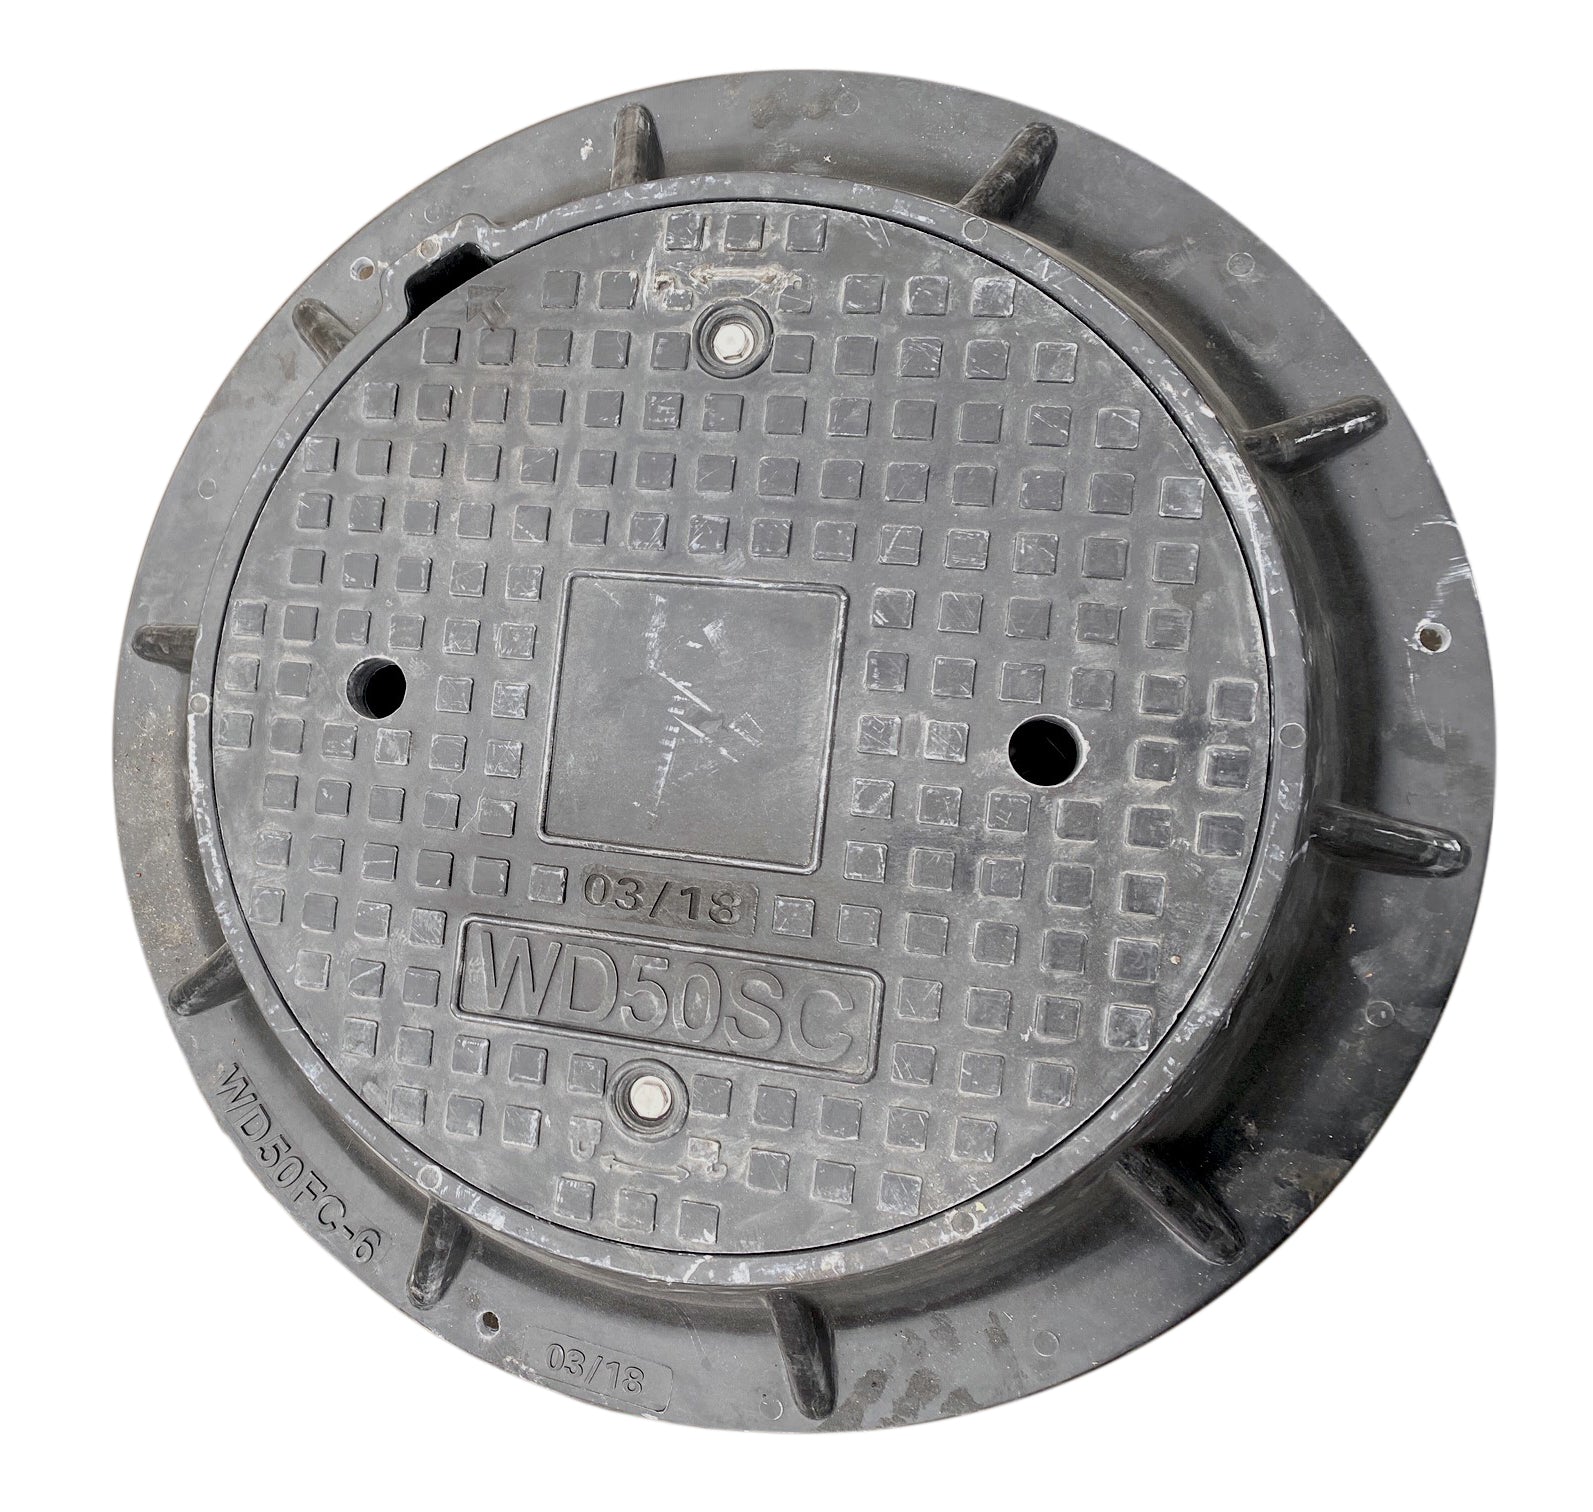 Composite Manhole Frames & Covers - City of Winnipeg Style Waterworks Products - Cleanflow